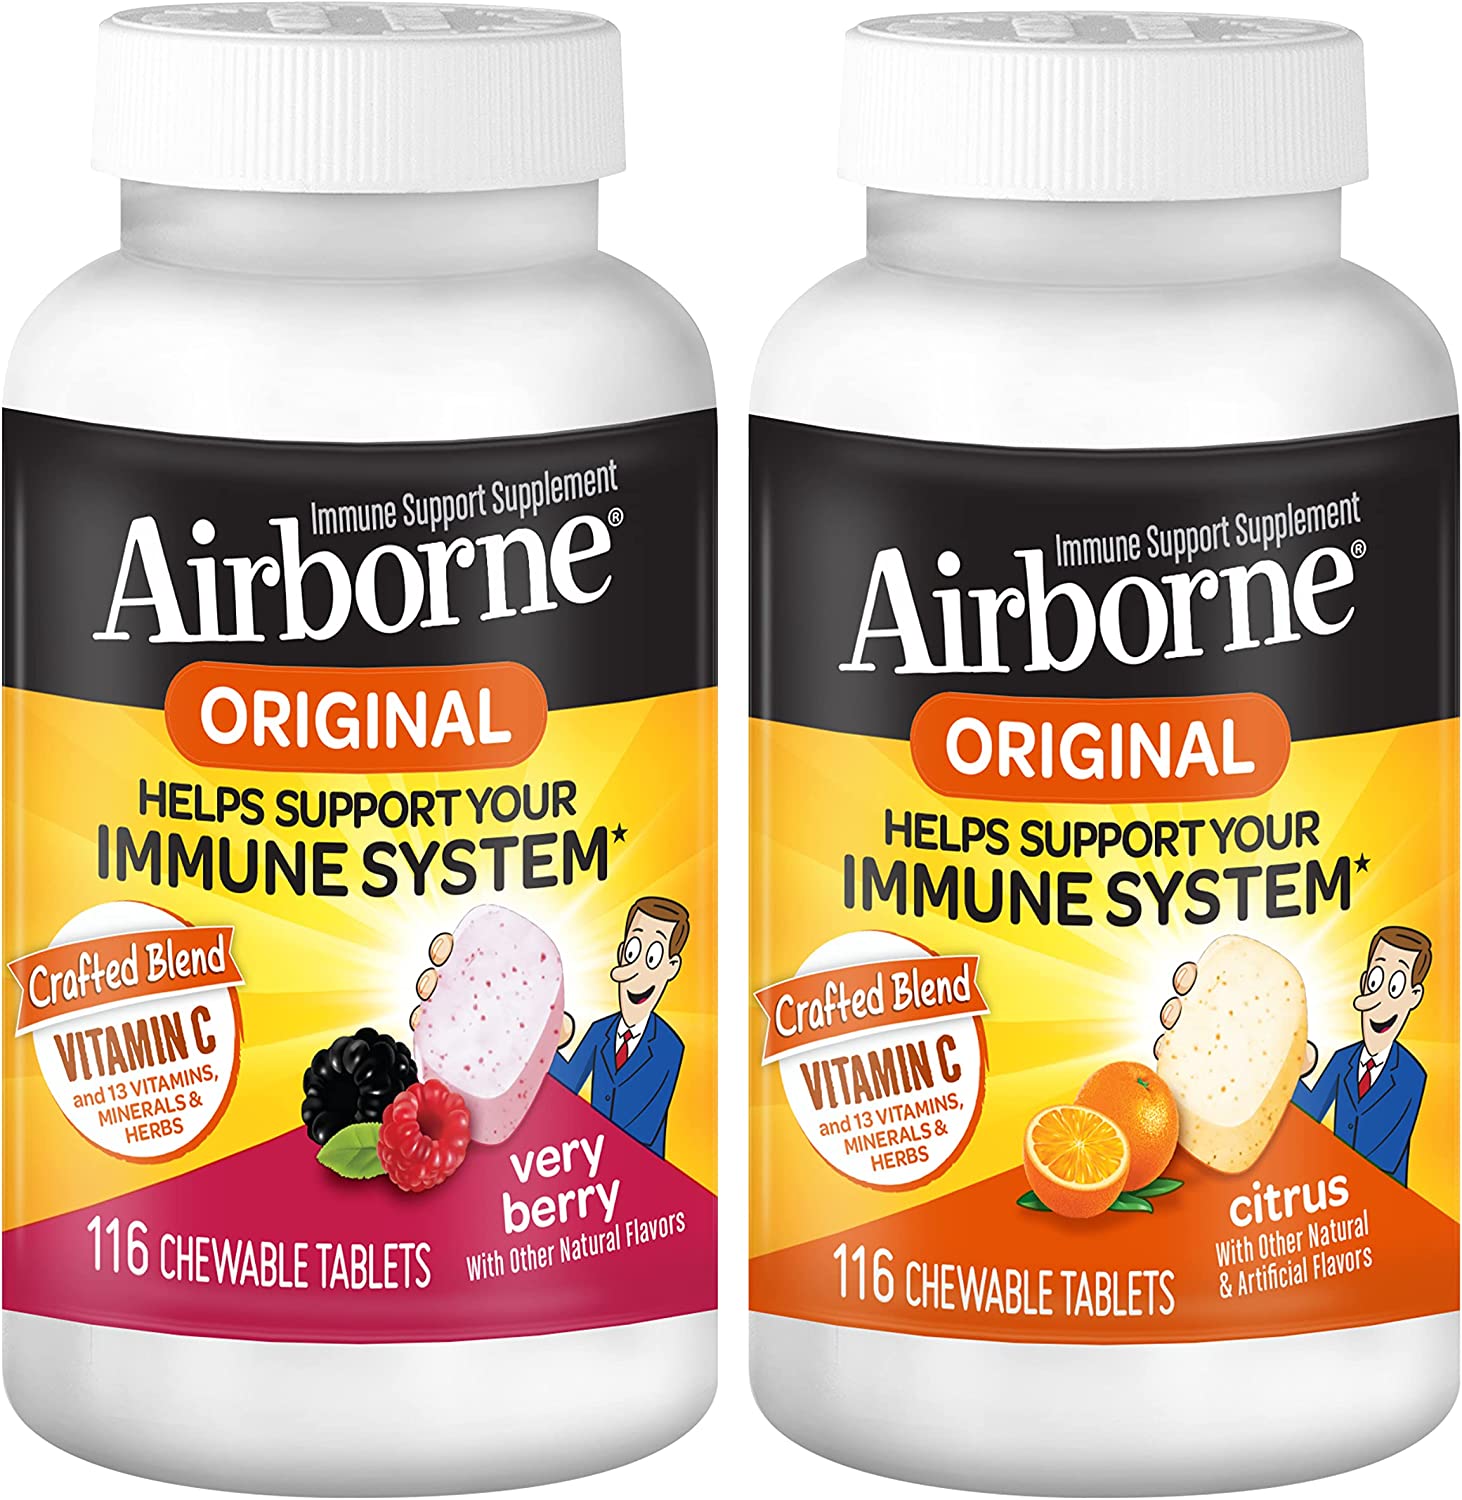 Airborne 1000mg Vitamin C Chewable Tablets Citrus & Very Berry Flavor Bundle – Immune Support Supplement with Zinc and Powerful Antioxidant Vitamins A C & E, (2x116ct bottles)